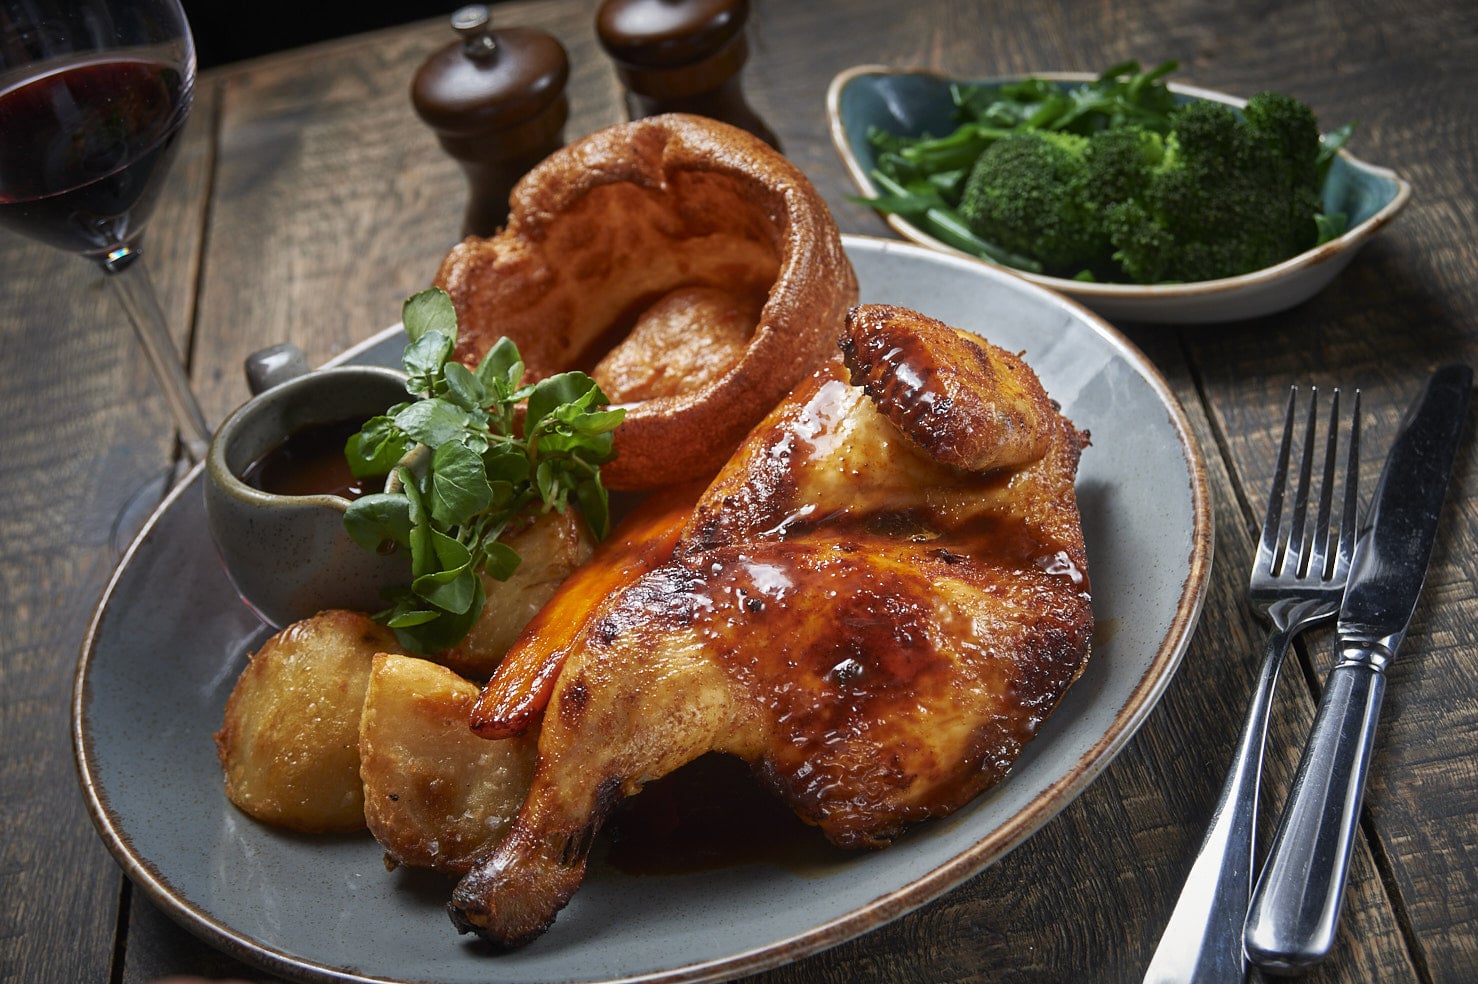 Classic Pub Dishes, And So Much More